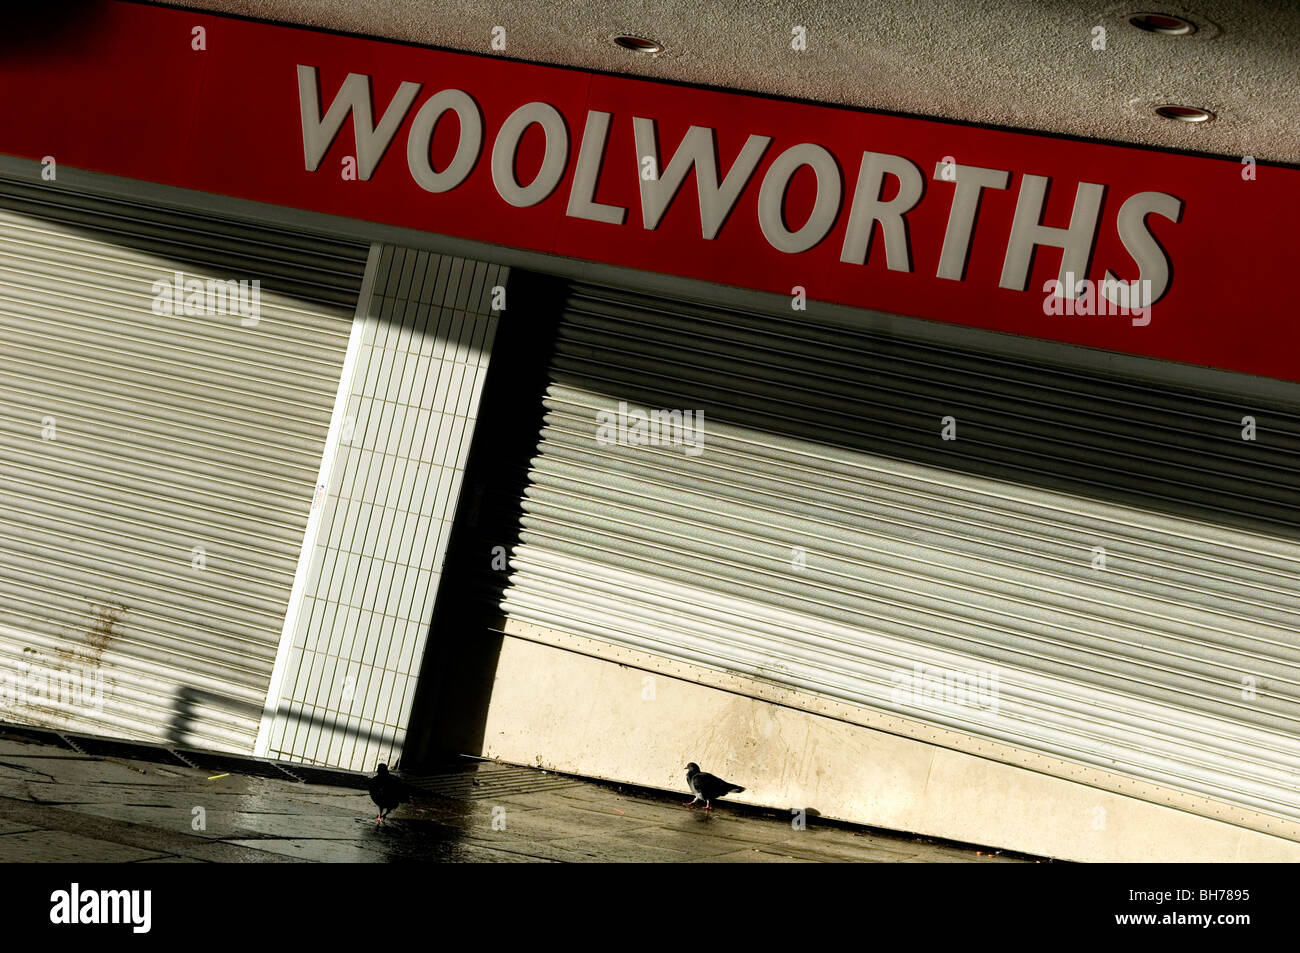 Woolworths Group plc Stockfoto